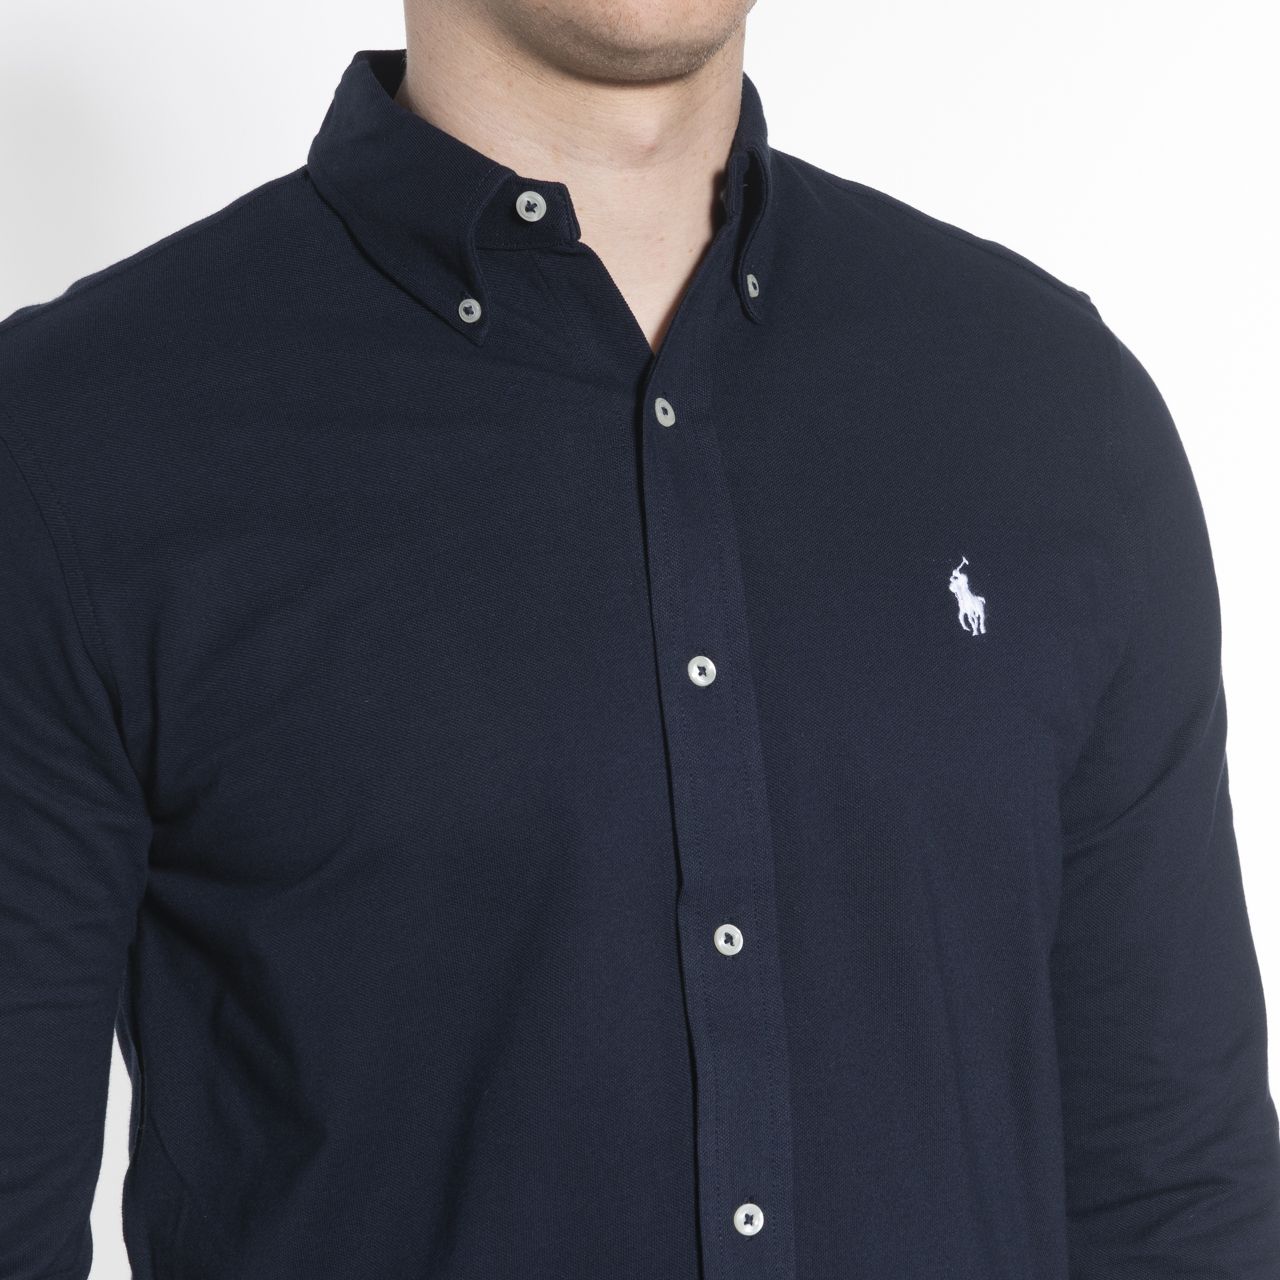 Polo Ralph Lauren Casual overhemd LM  Donkerblauw 058445-003-L